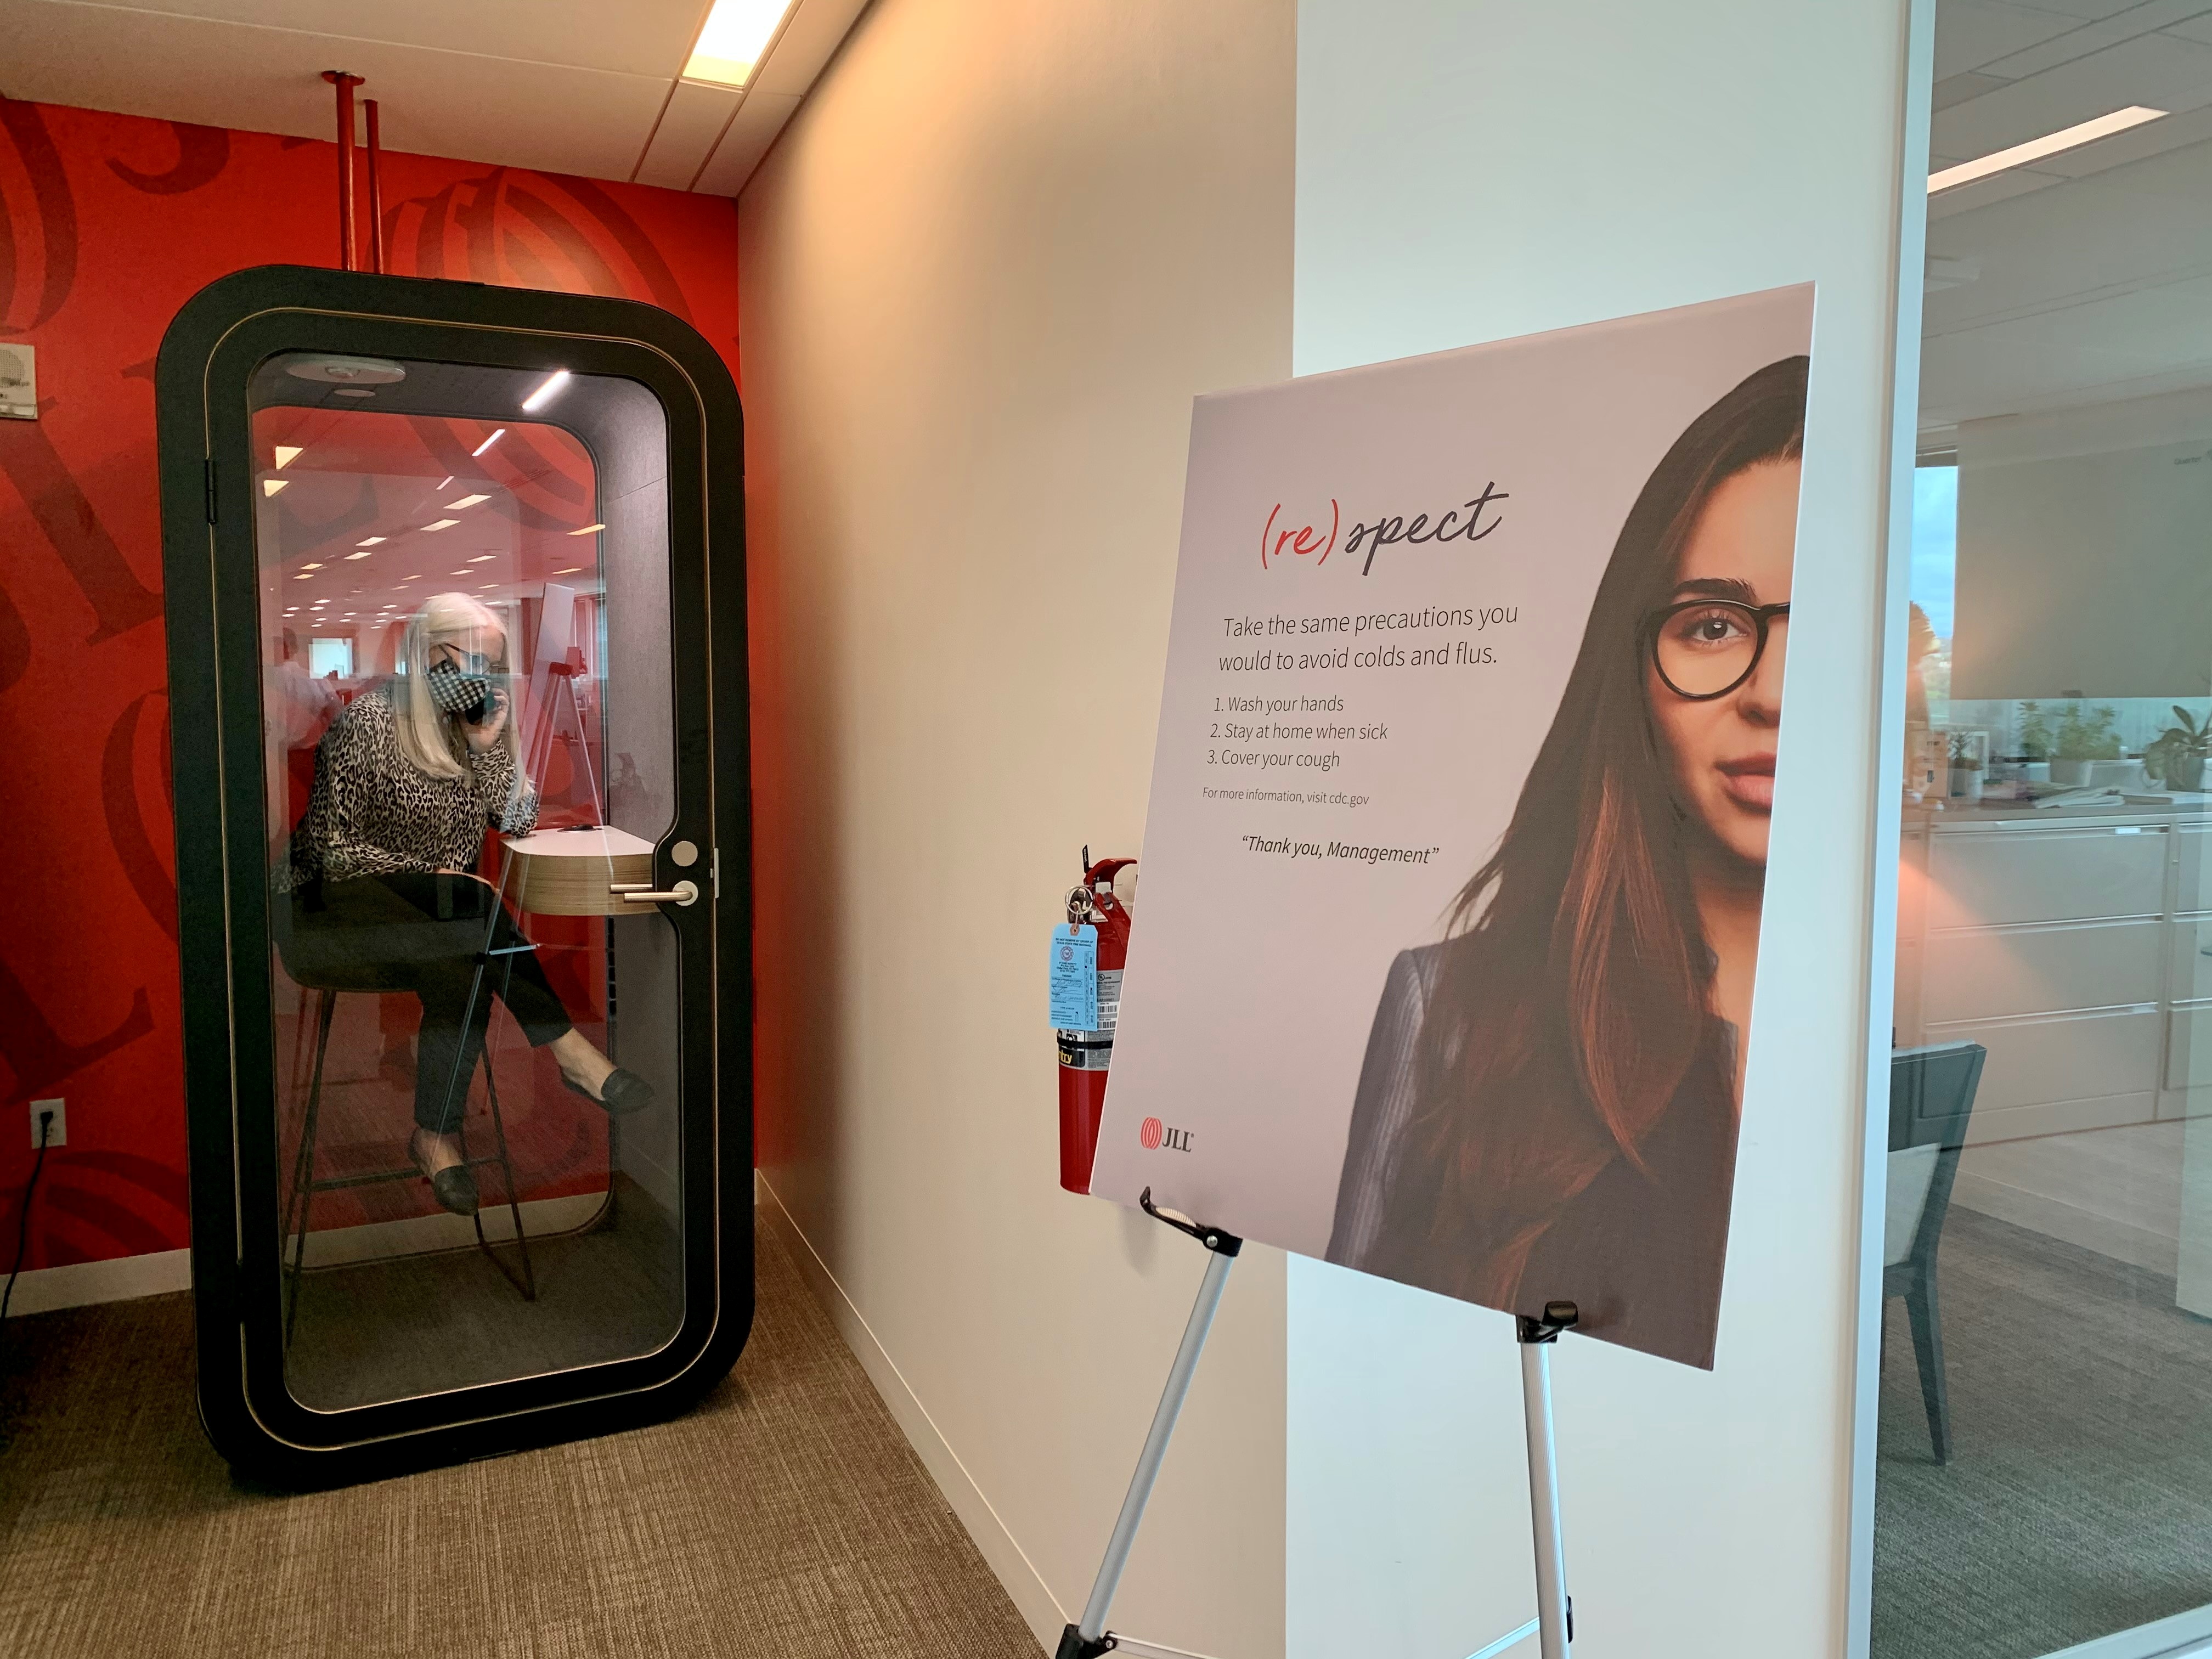 An employee makes a call in a newly-installed phone booth at real estate company JLL's Austin office